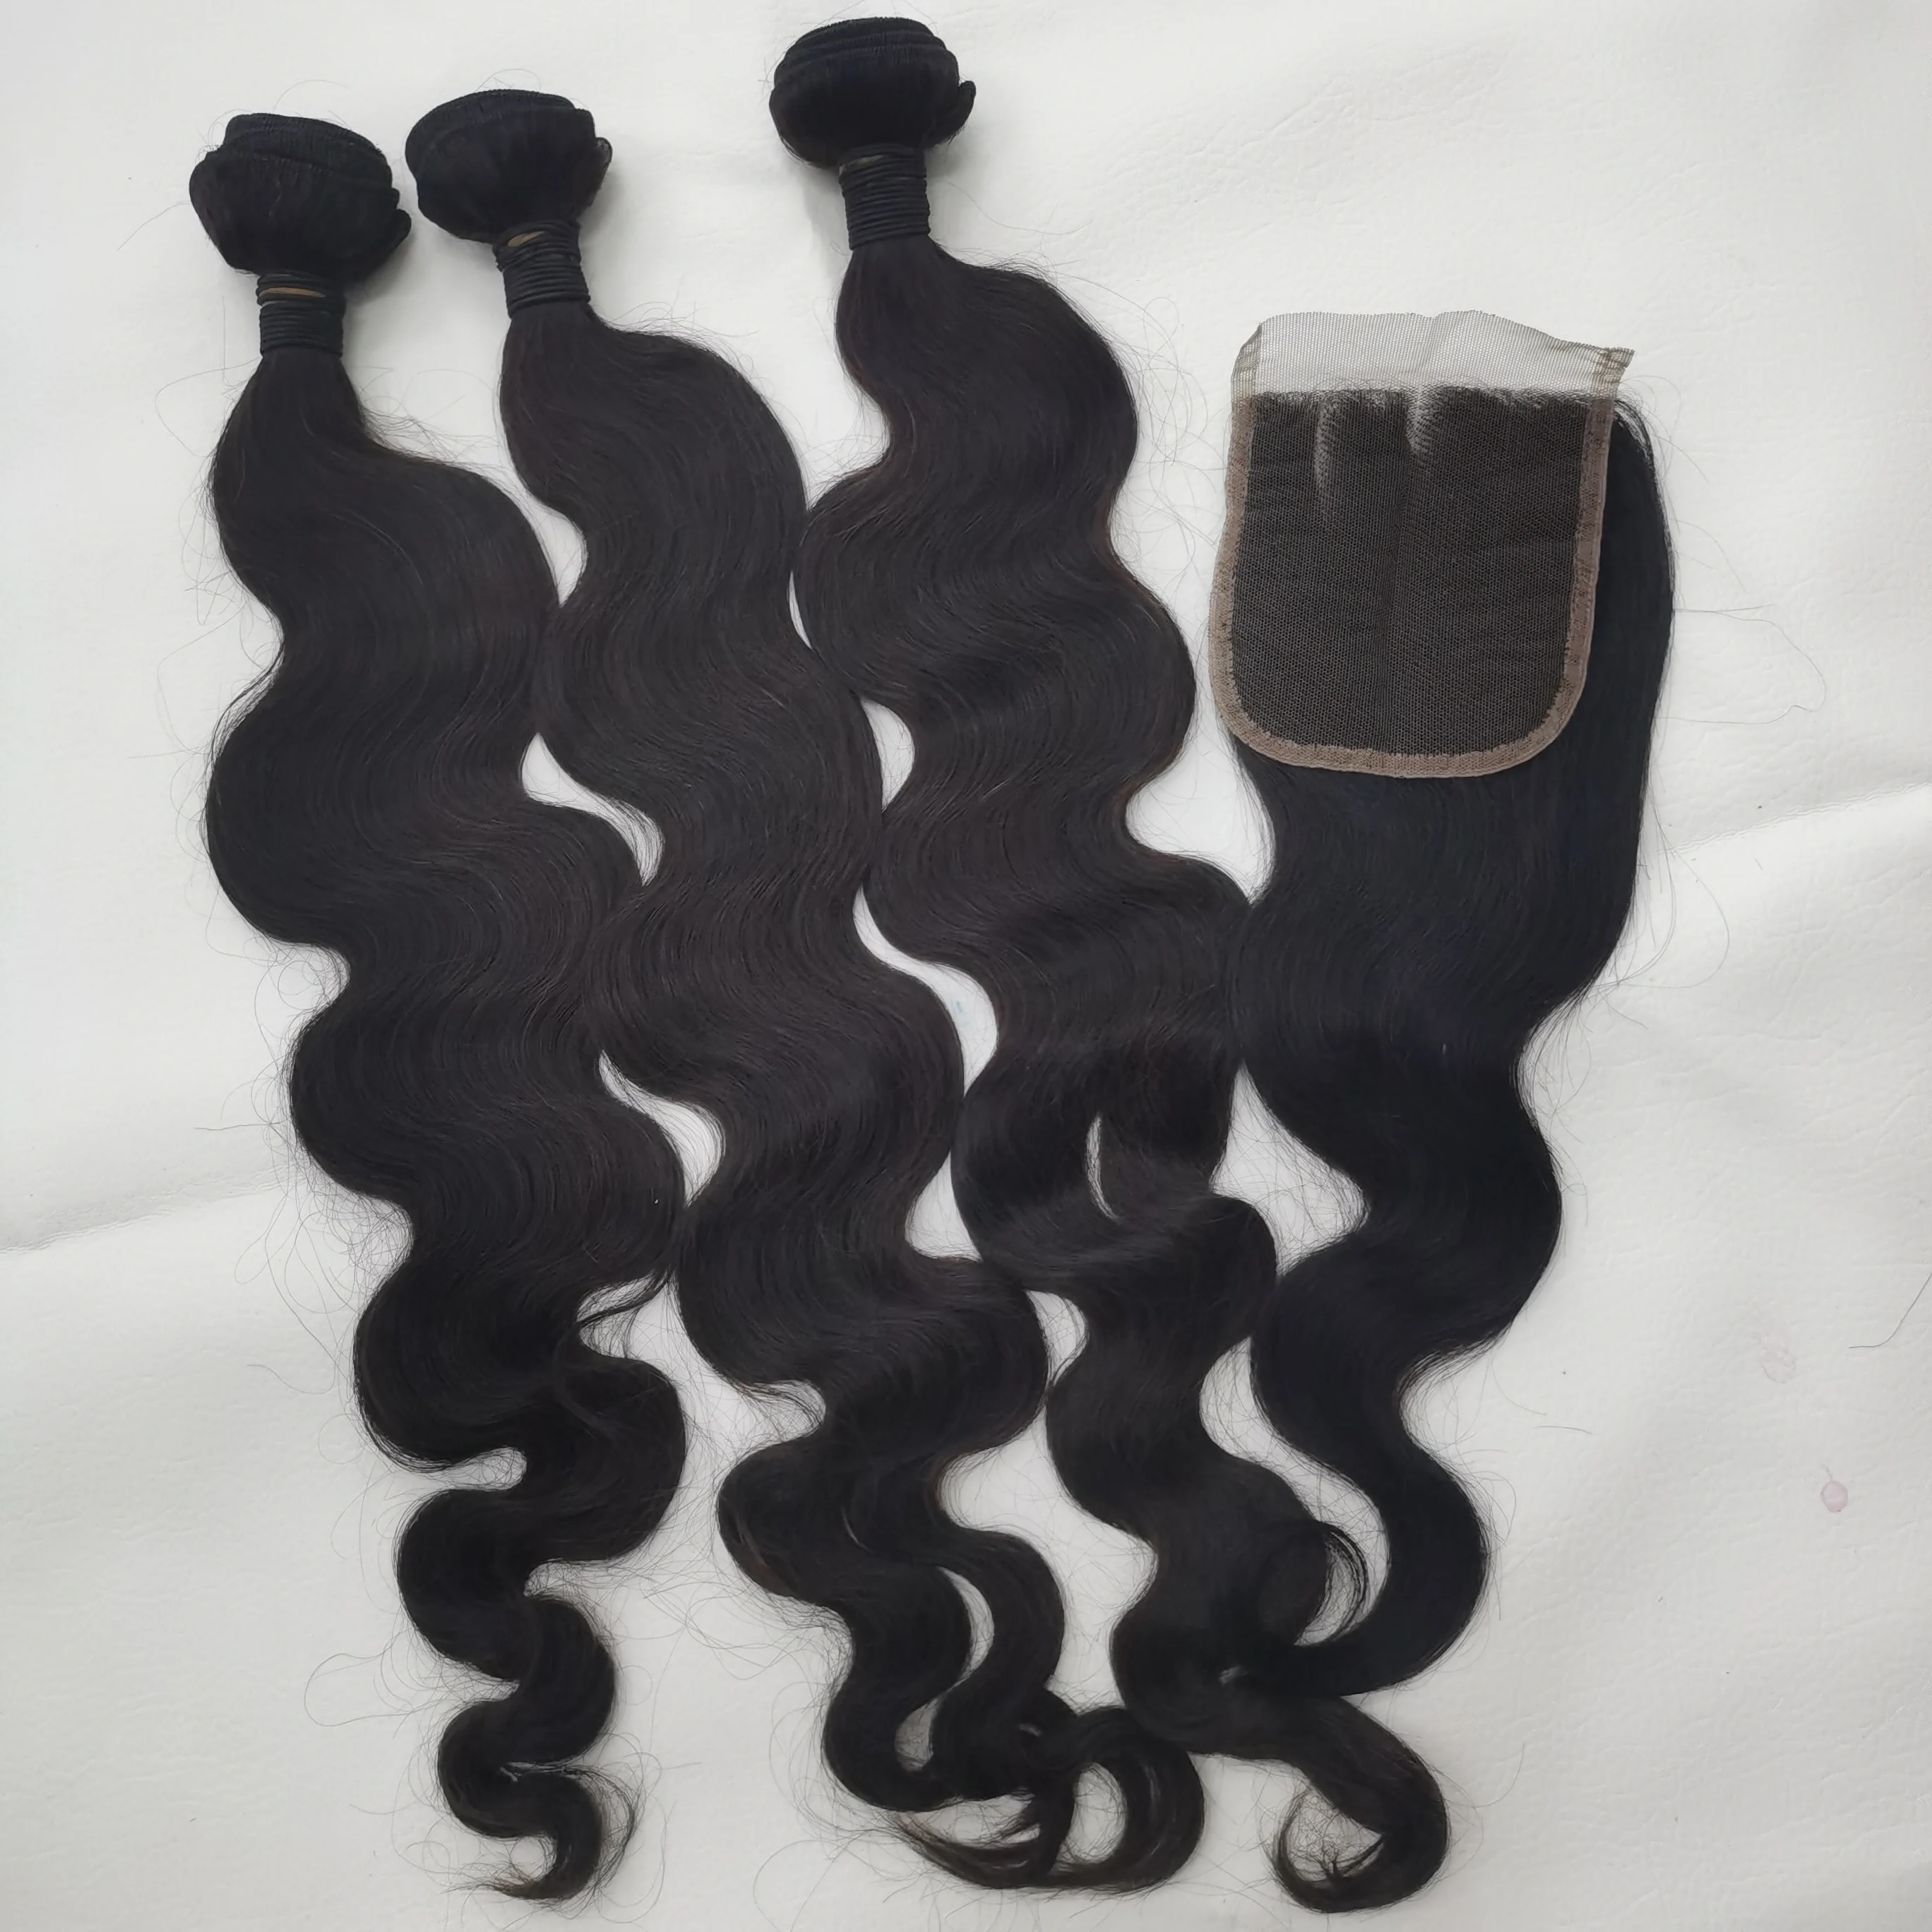 

Letsfly TOP Quality Body Wave Human Virgin Hair Bundles With Lace Closure 10A Remy Hair Extensions Free Shipping